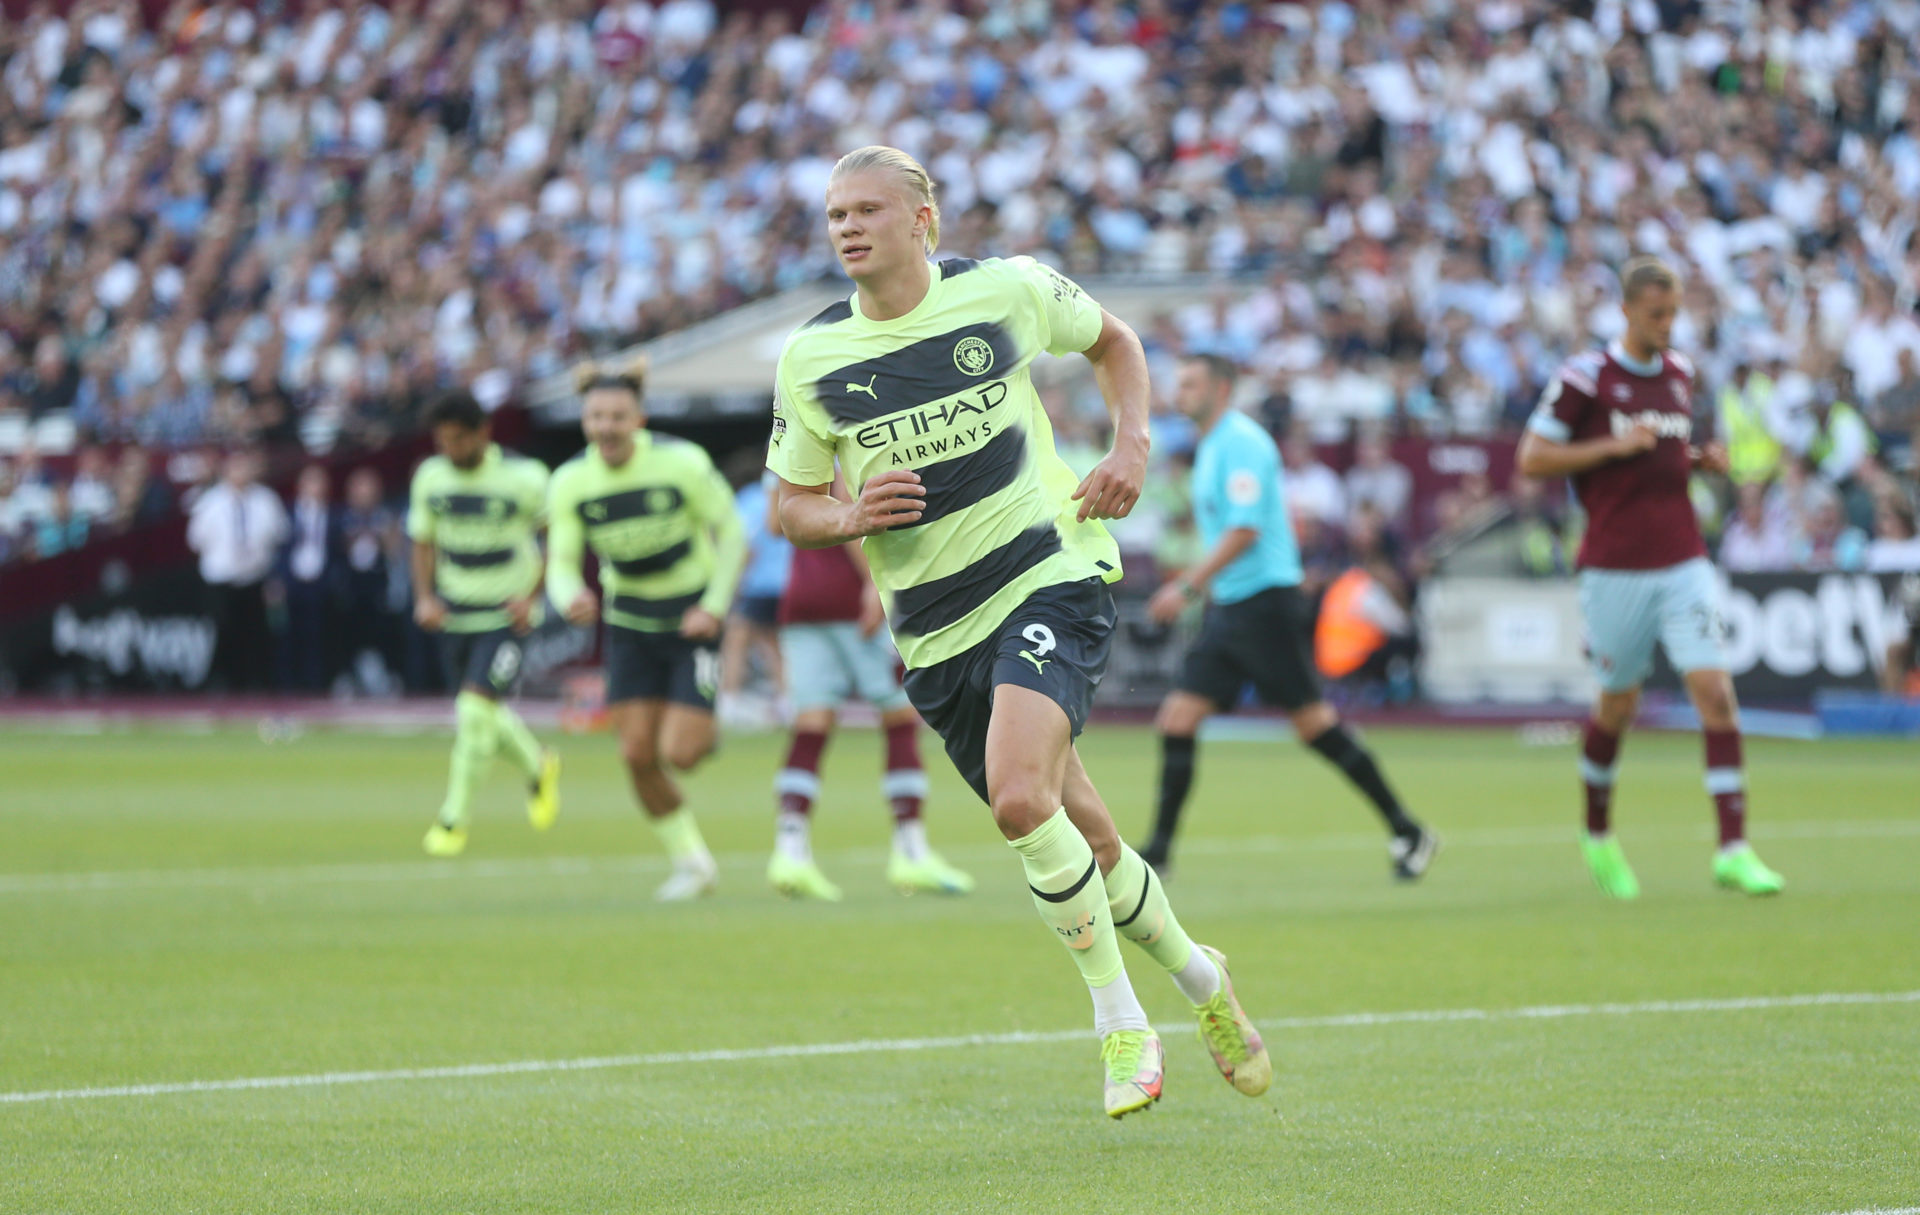 Erling Haaland was sensational for Manchester City against West Ham yesterday